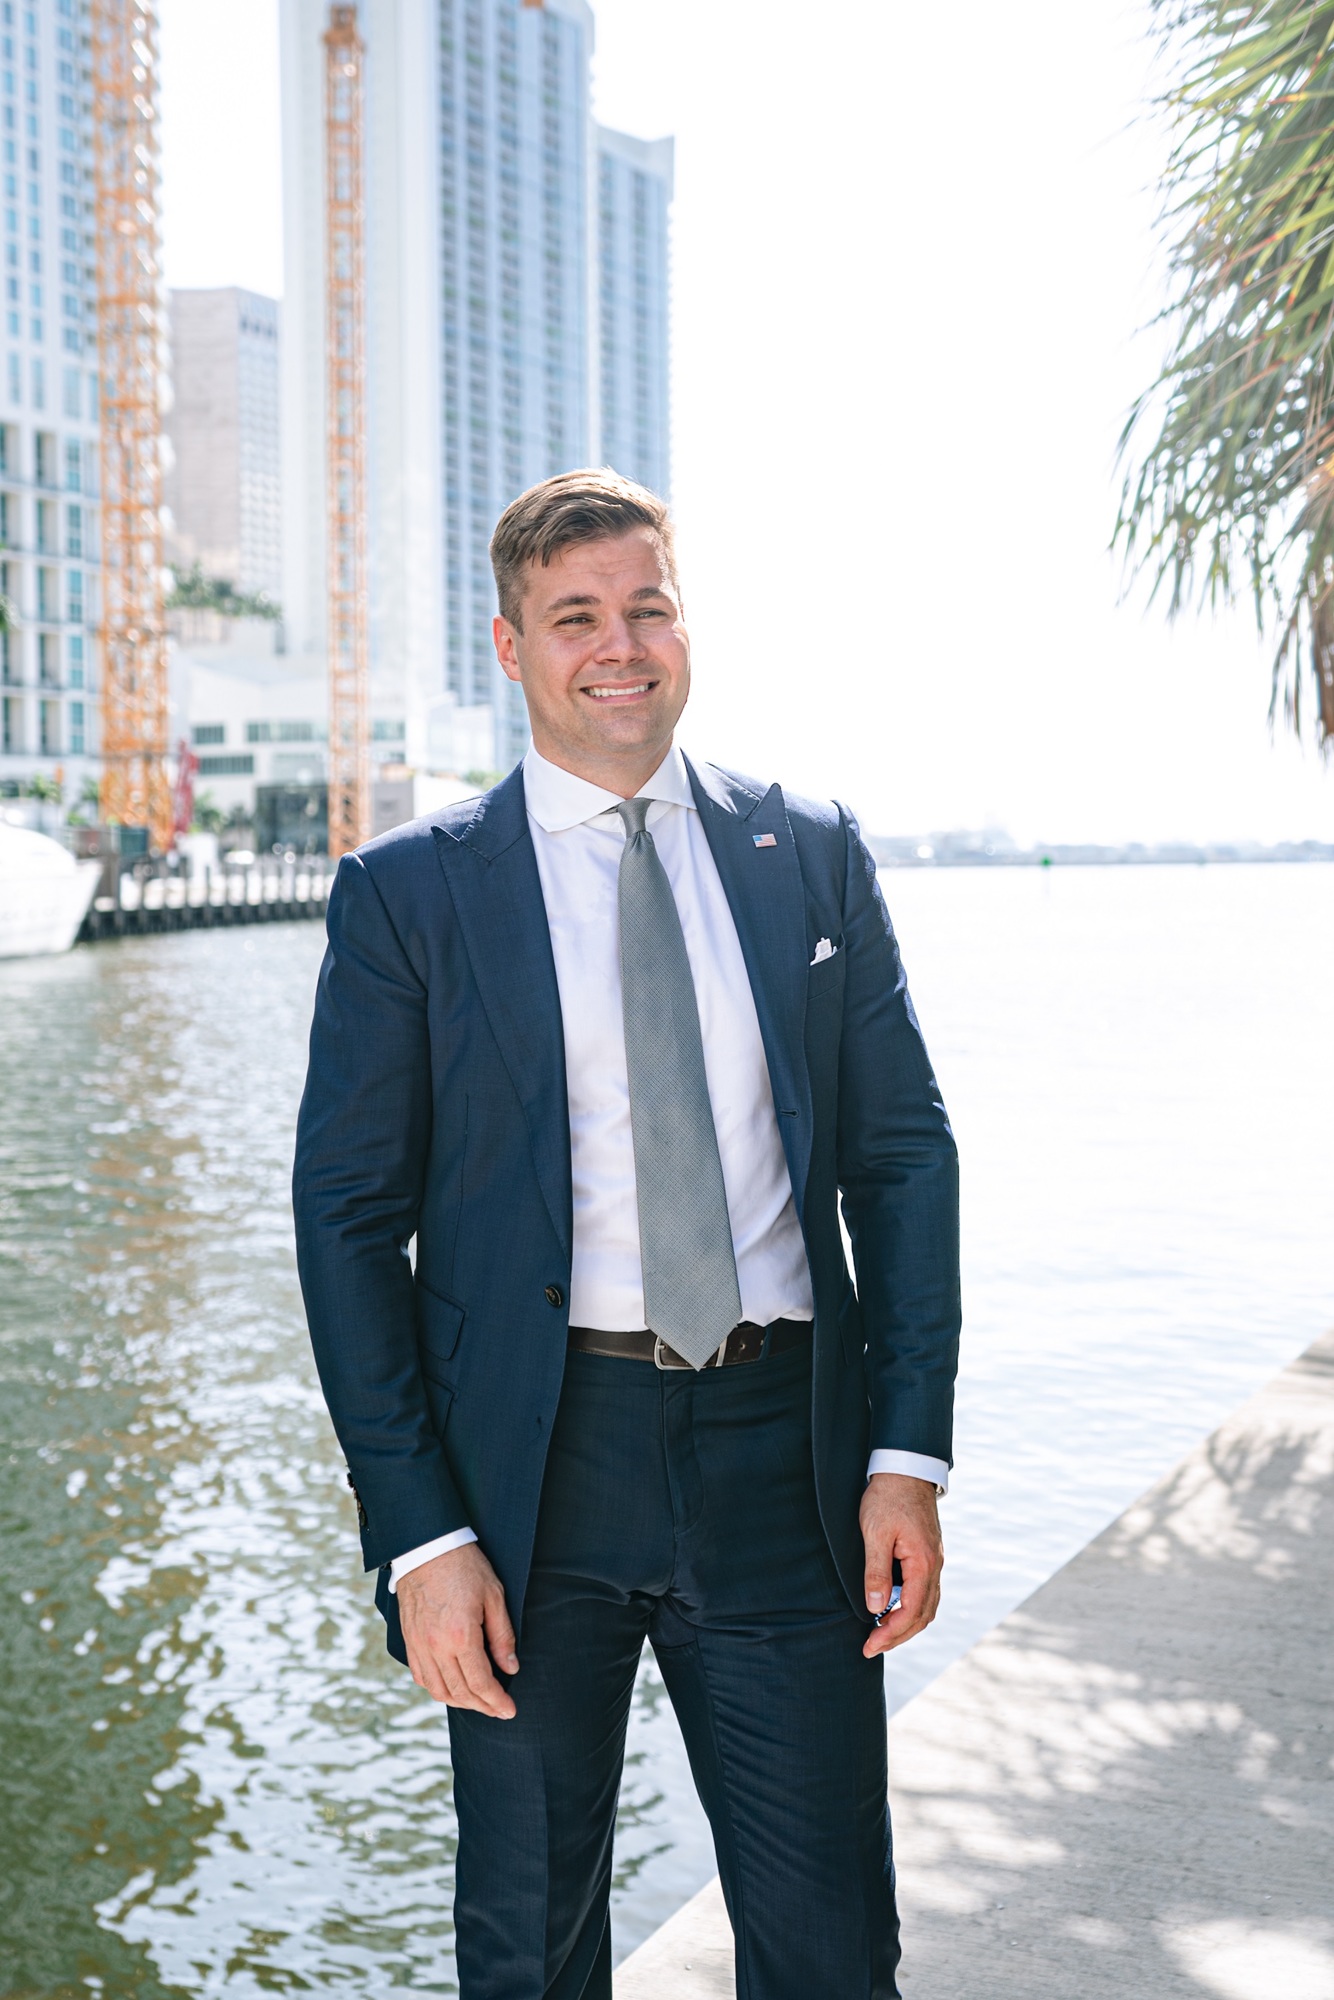 COURTESY PHOTO -- Jakub Hejl formed Westside Capital in 2016. Since then, his firm has invested more than $120 million to acquire mostly apartment projects.